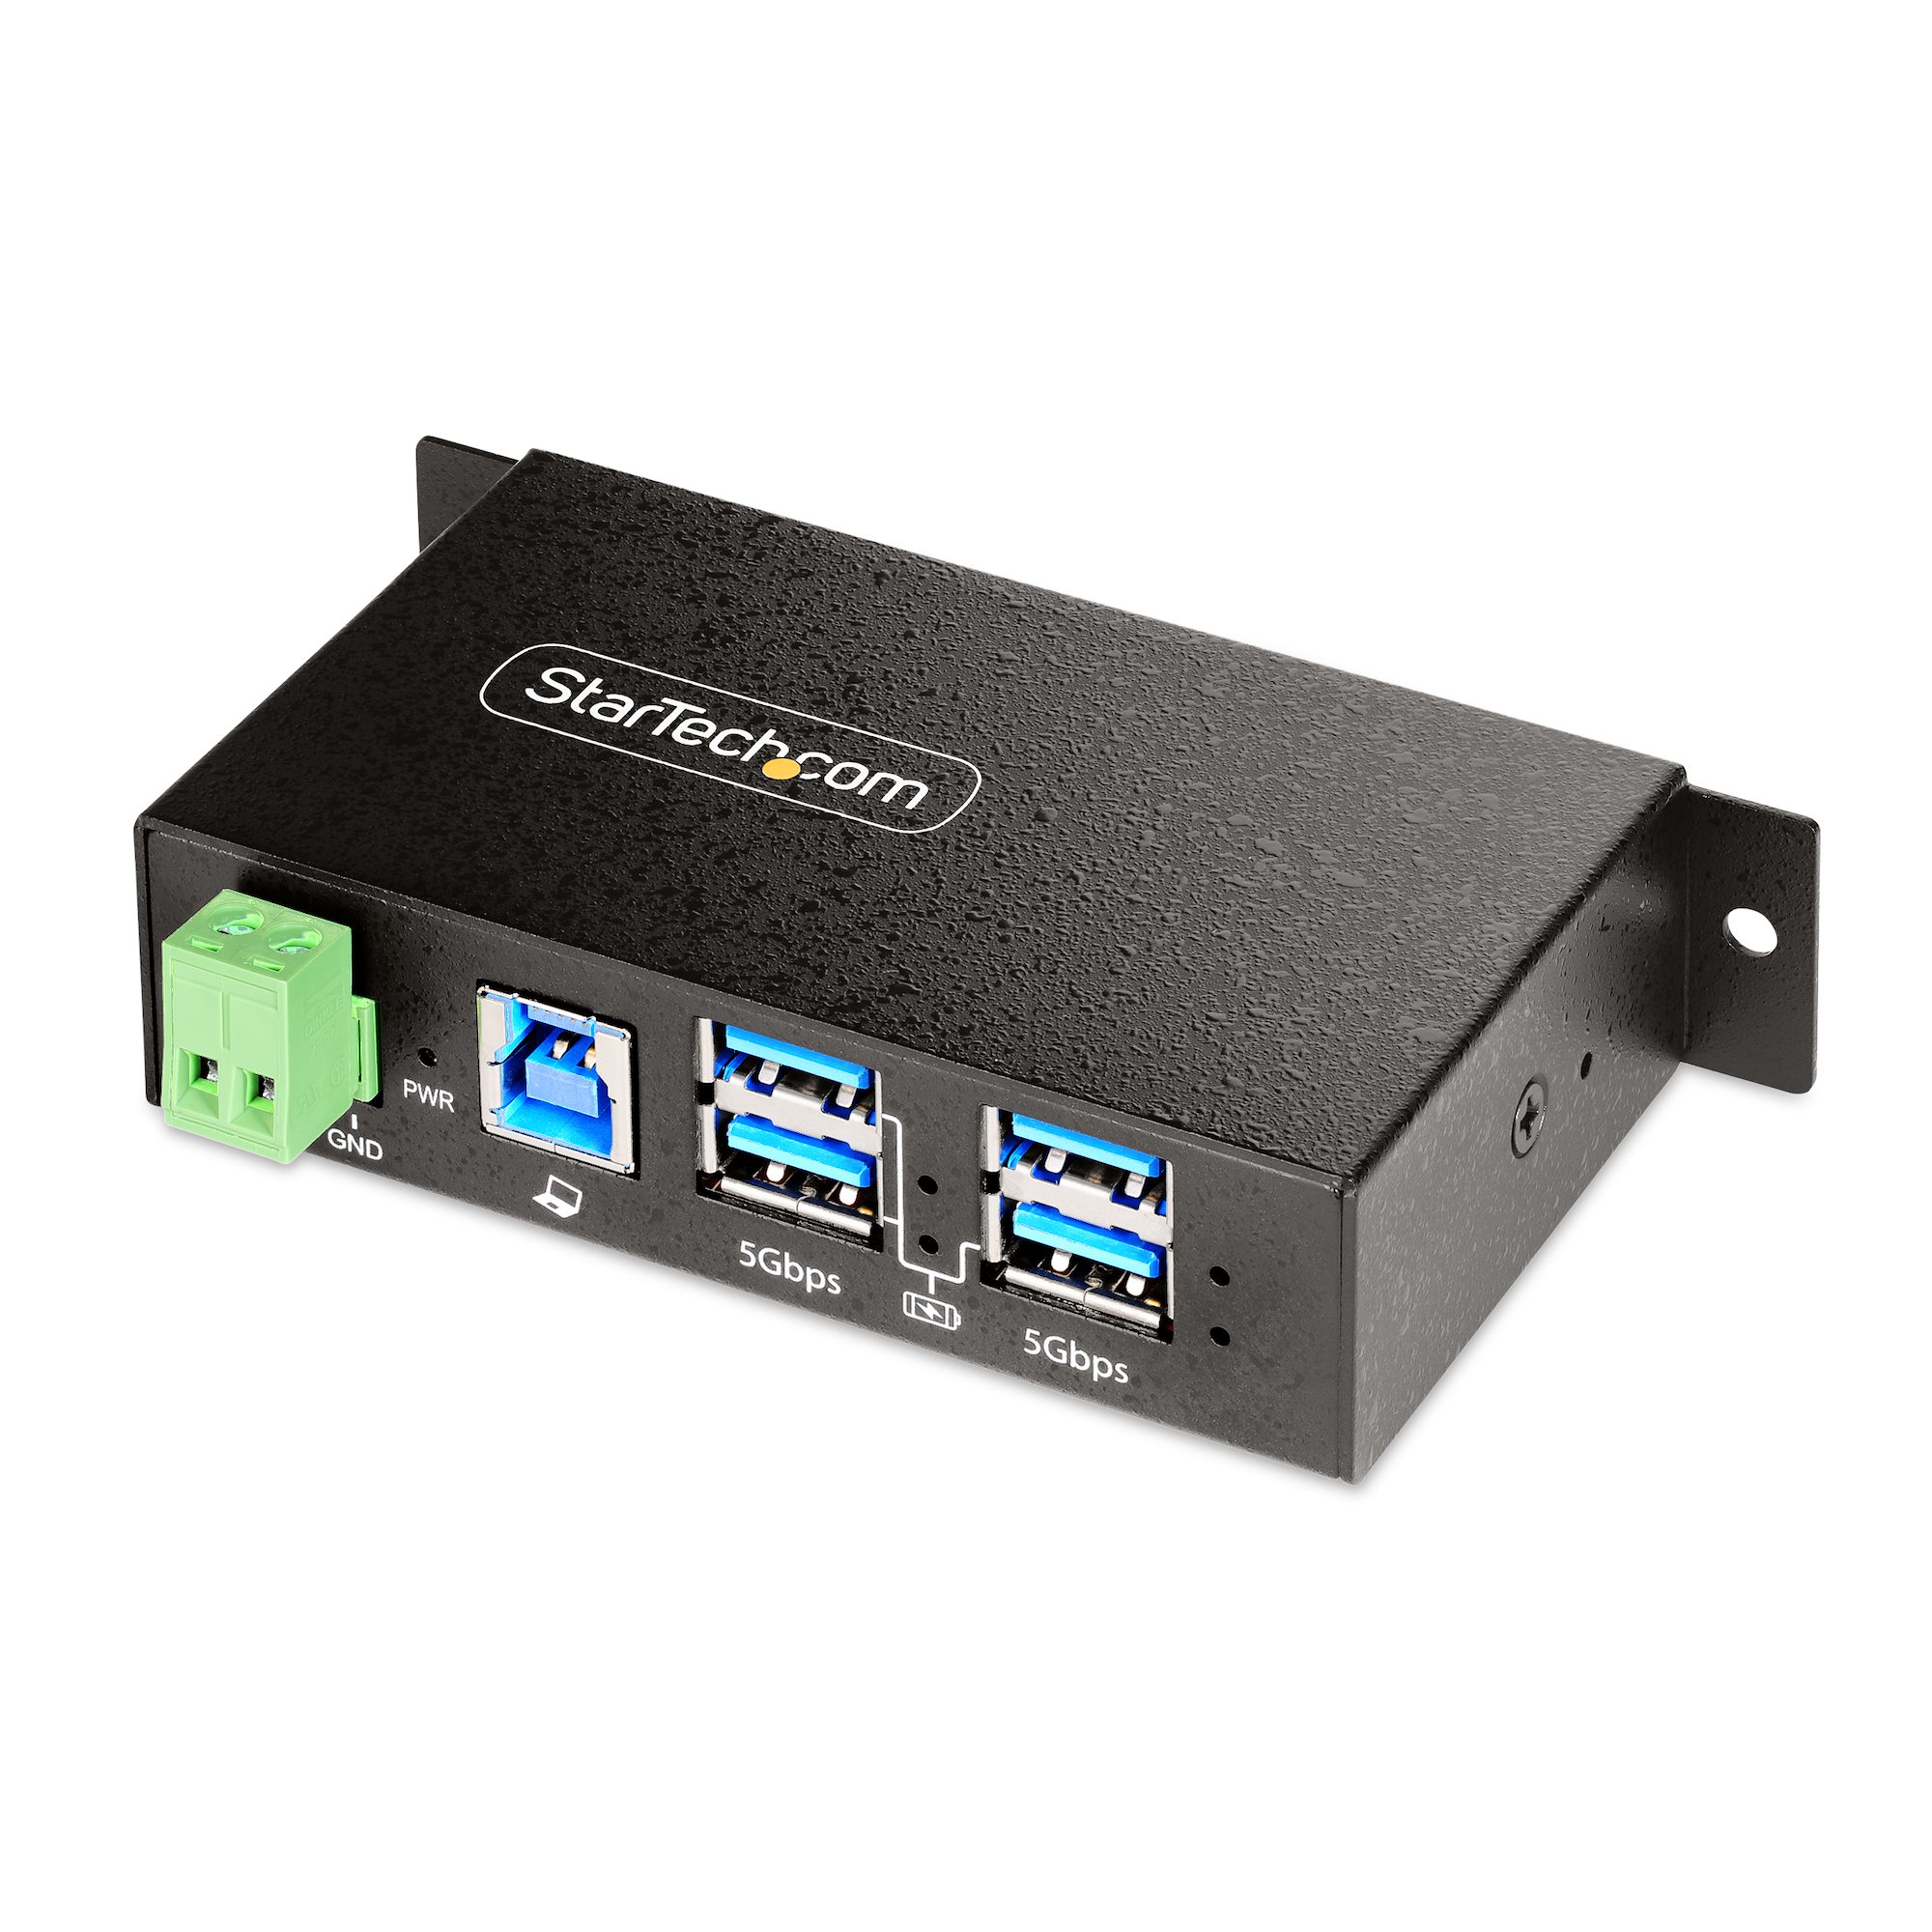 StarTech.com 4-Port USB 3.2 Gen 1 (5Gbps) Hub with On/Off Port Switche –  Network Hardwares